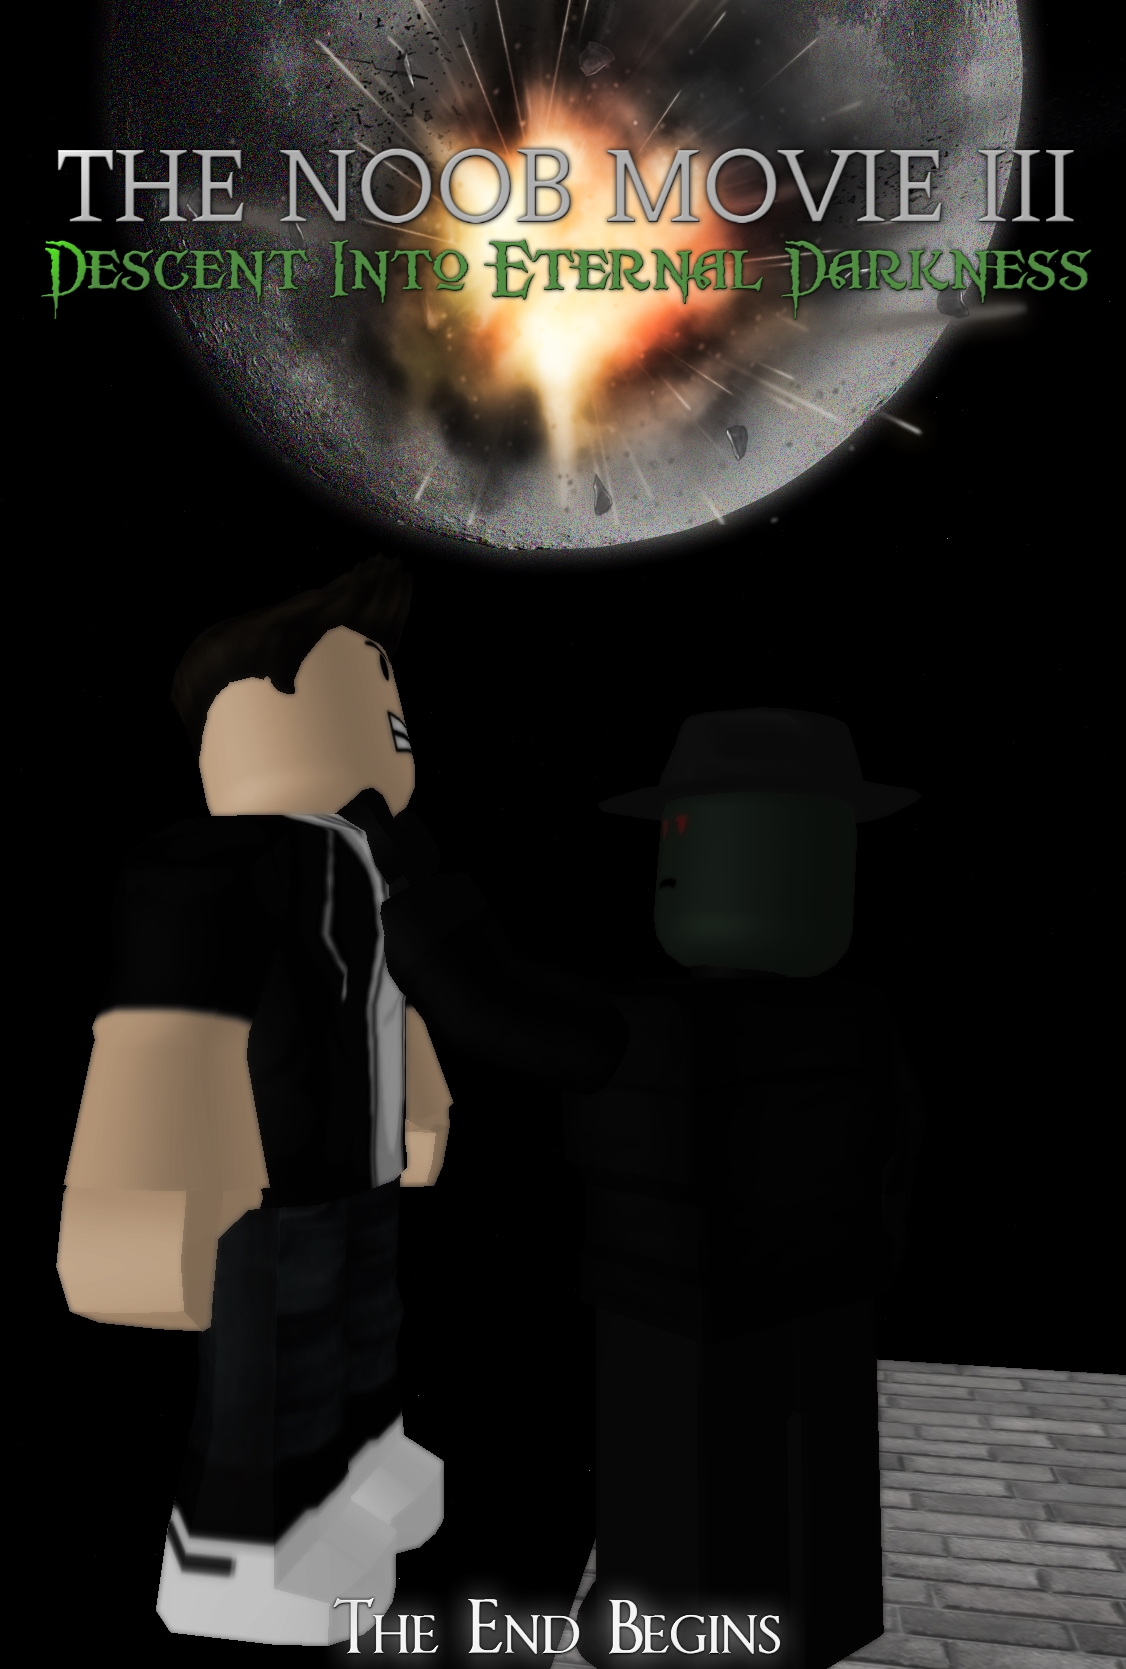 The Noob Movie Iii Descent Into Eternal Darkness Roblox Film Wiki Fandom Powered By Wikia - the noob film series roblox film wiki fandom powered